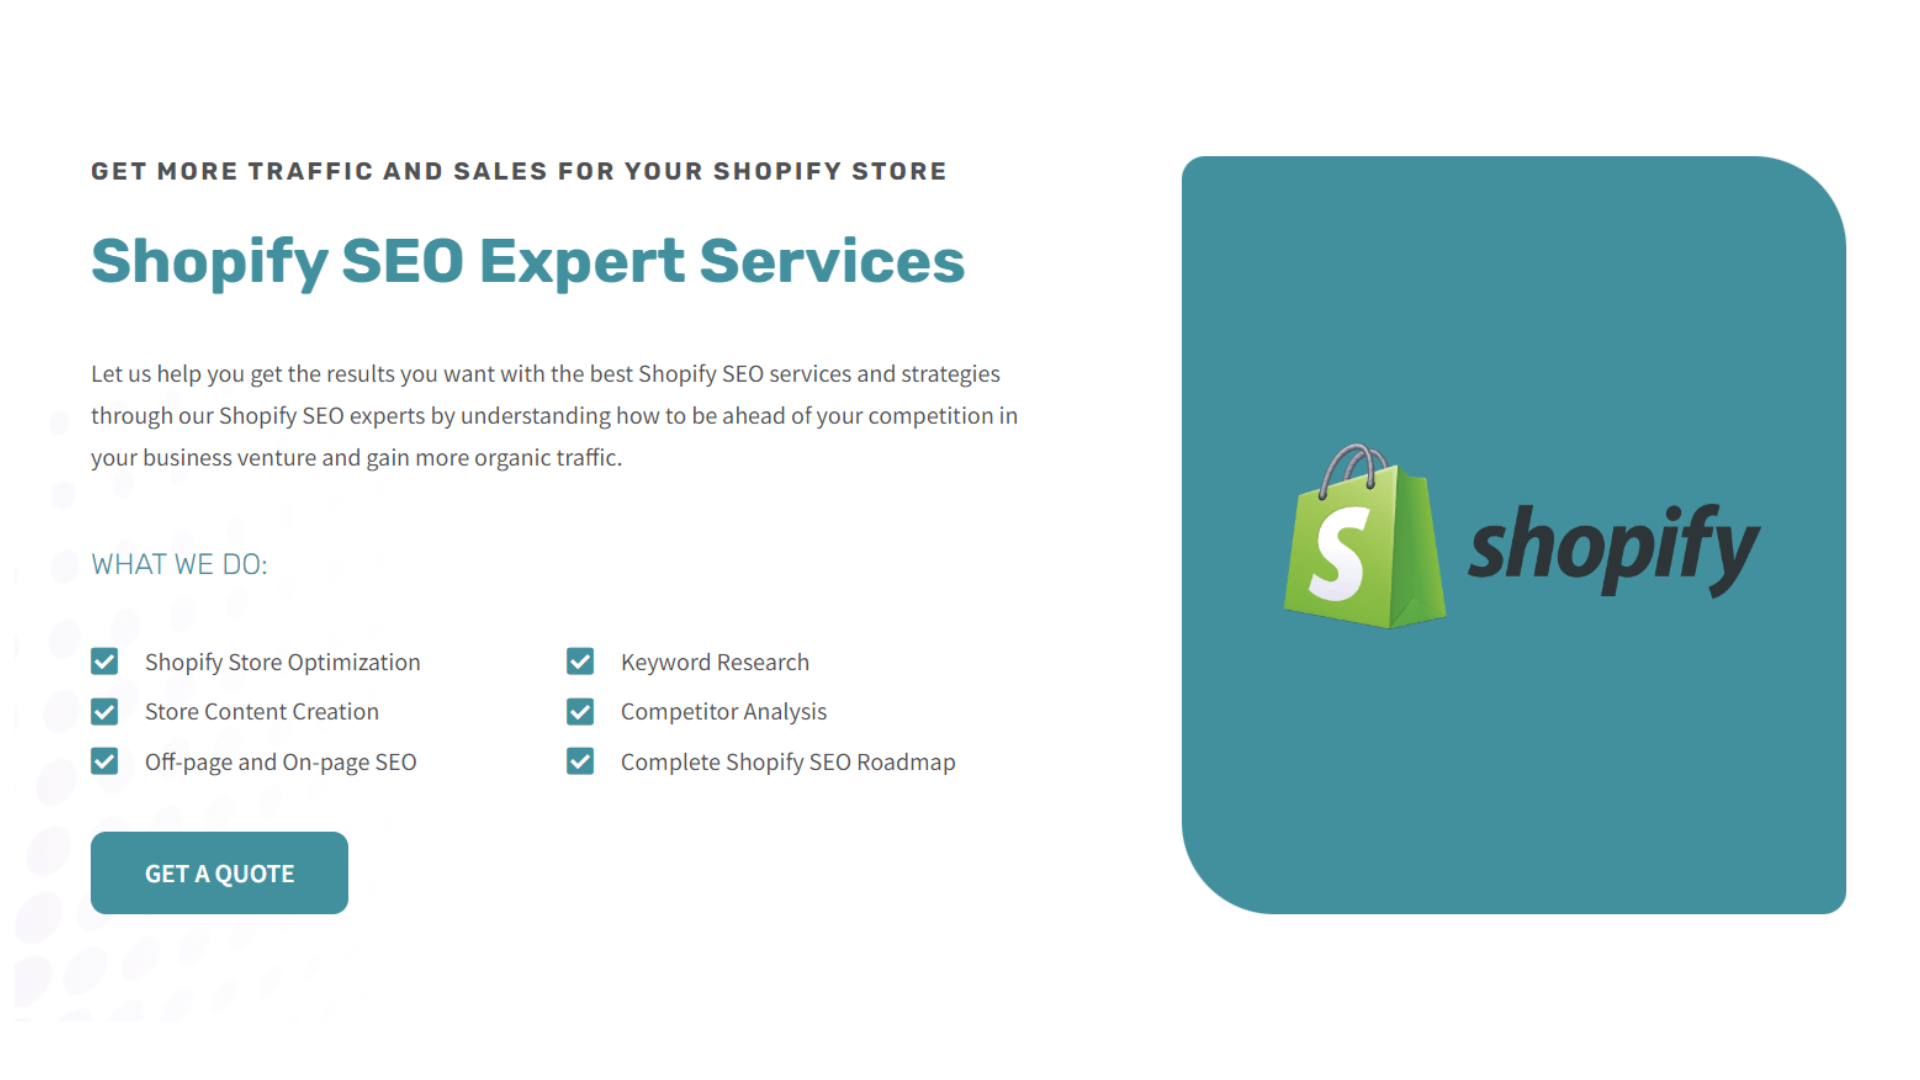 Shopify Seo Expert What To Expect When Working With A Shopify Seo Expert?